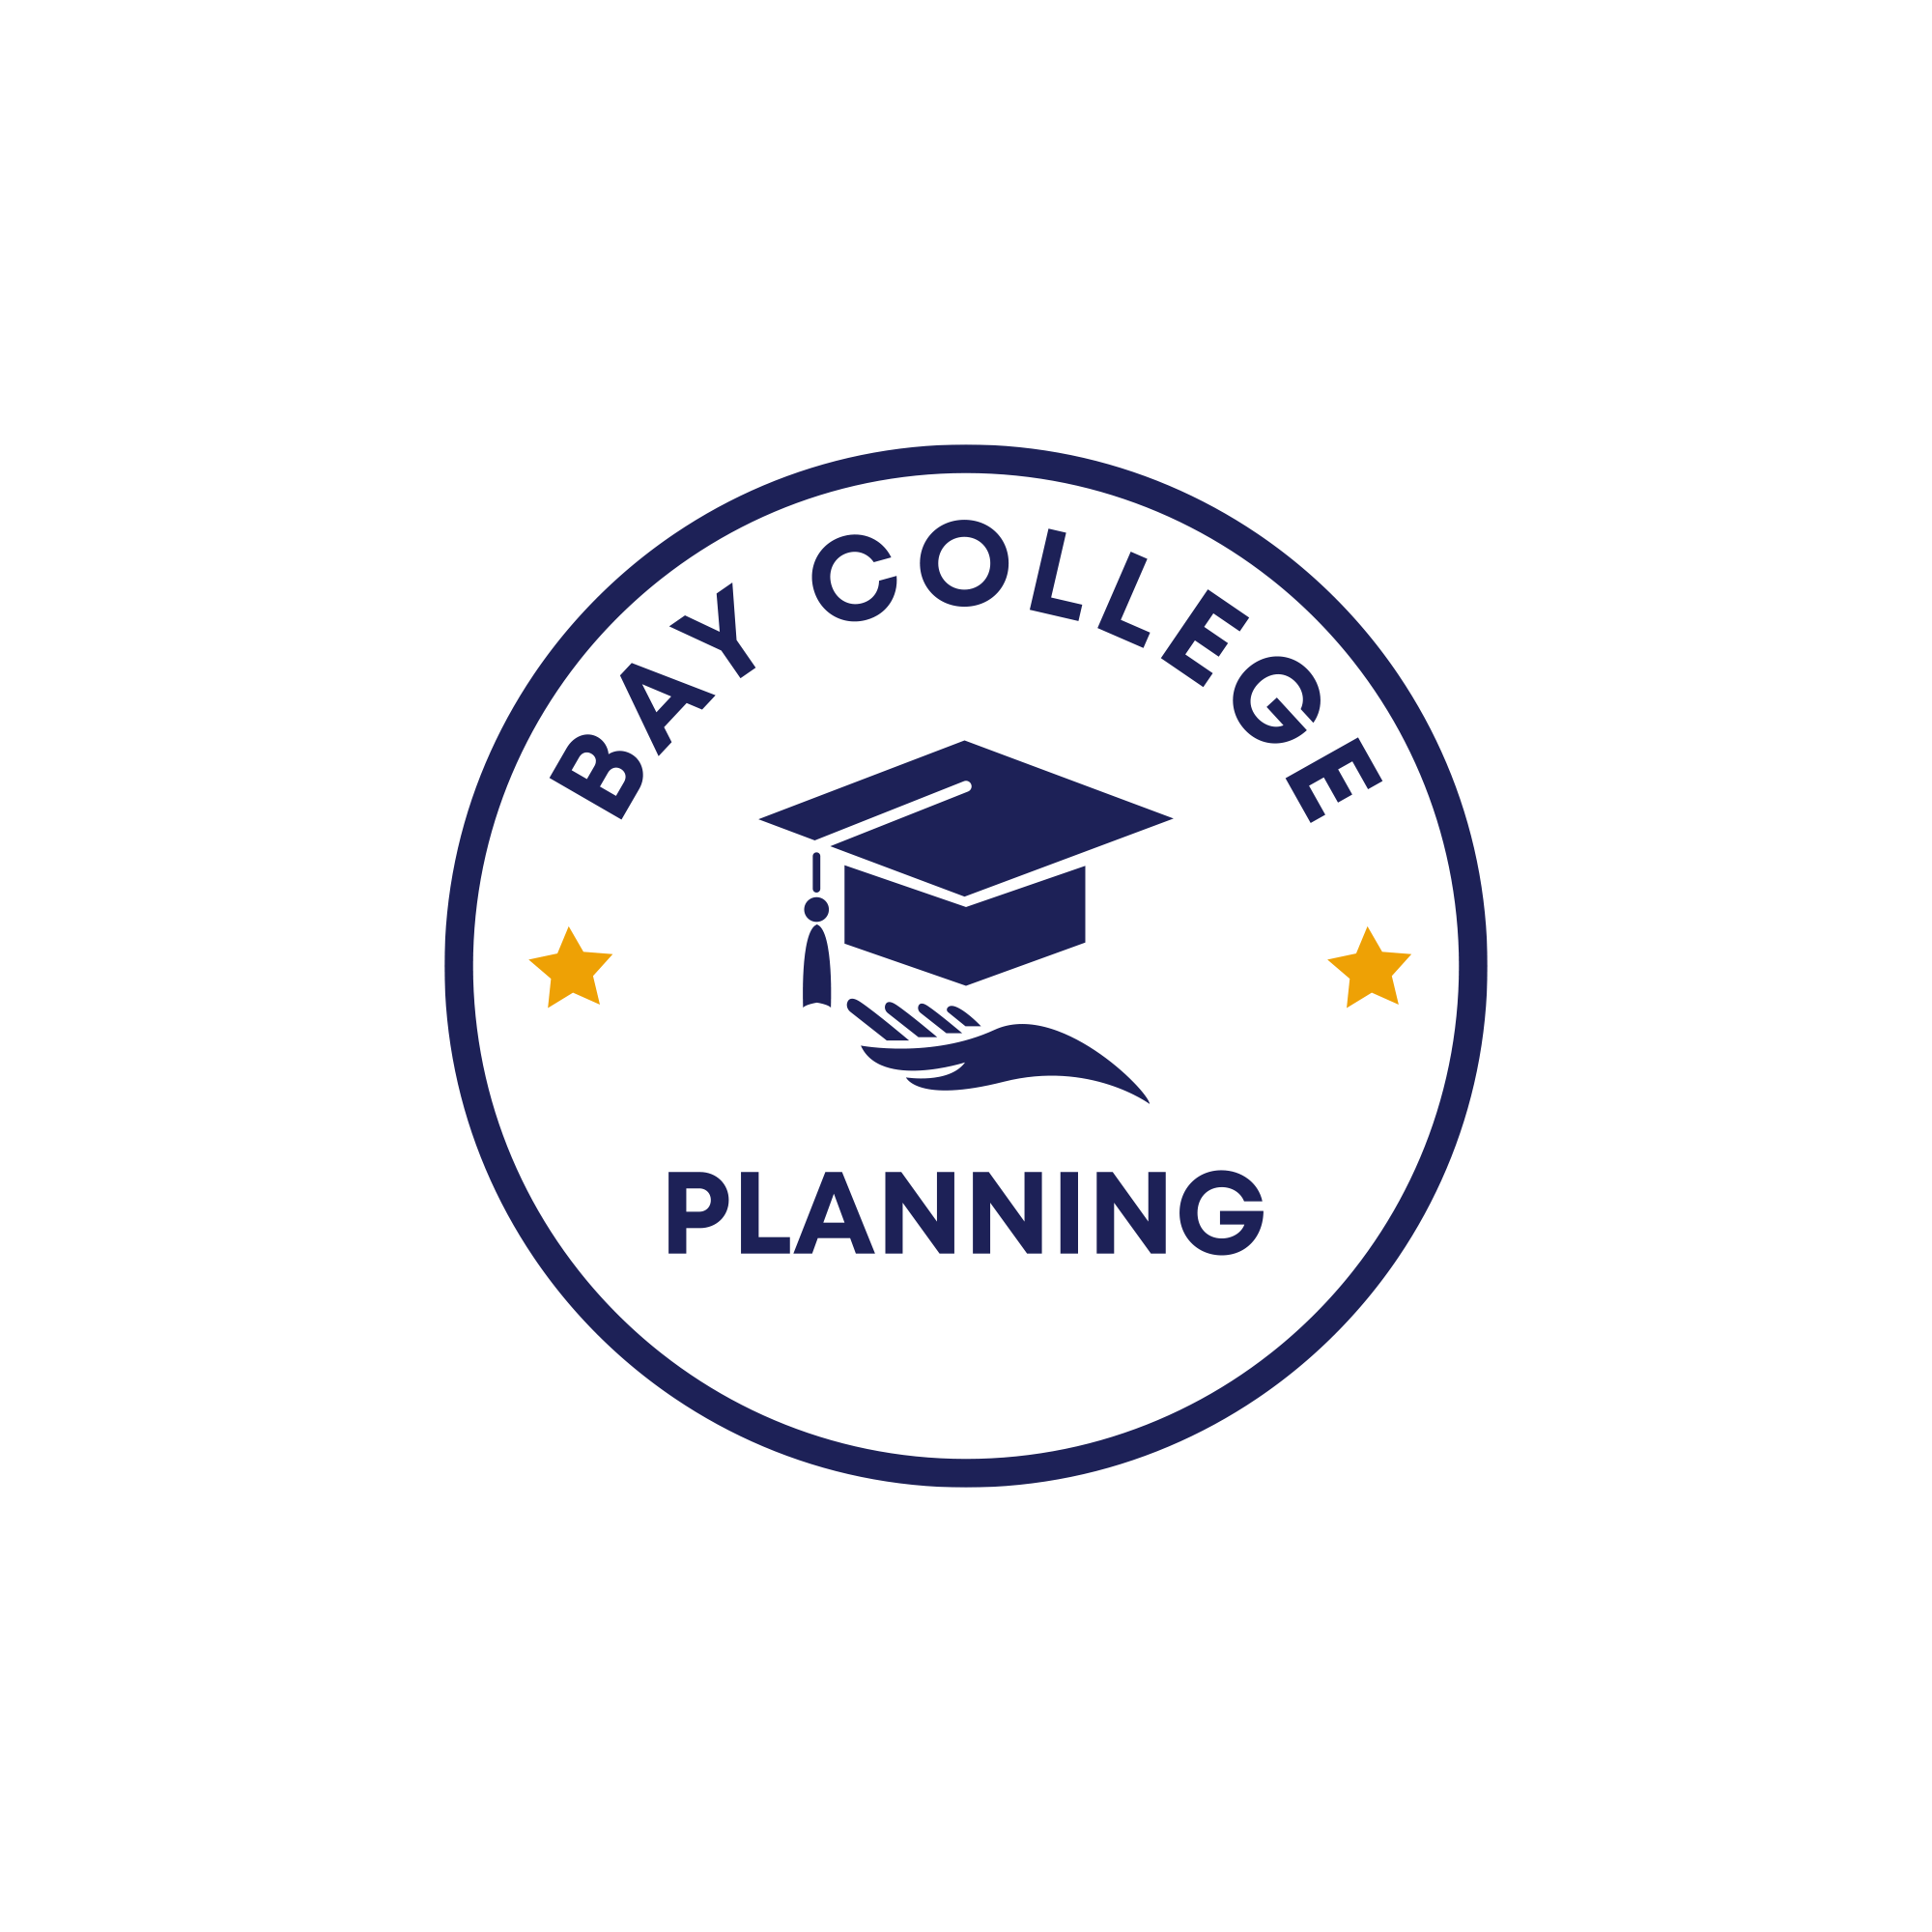 COLLEGE PLANING BRAND! brand college hand hands help logo circle support vintage